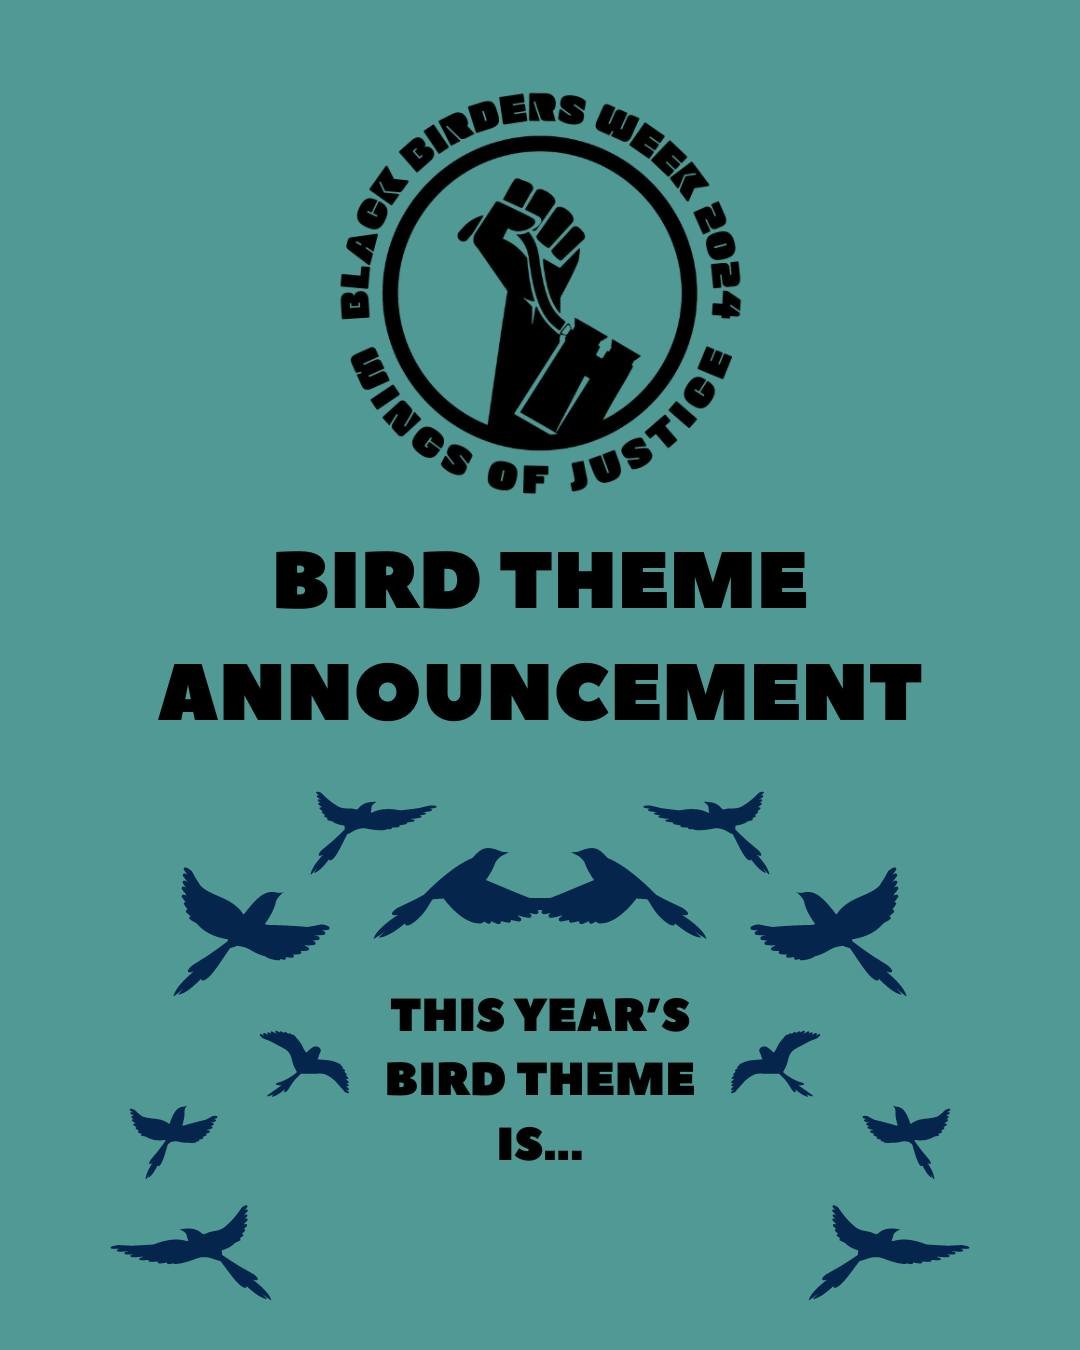 🌟NEW ANNOUNCEMENT🌟 

This year's #BlackBirdersWeek Bird Theme is...the Corvid family!!! The Corvid family, or Corvidae, includes more than 120 species including crows, ravens, jays, magpies, jackdaws, nutcrackers, treepies, rooks, and choughs. 

Ou